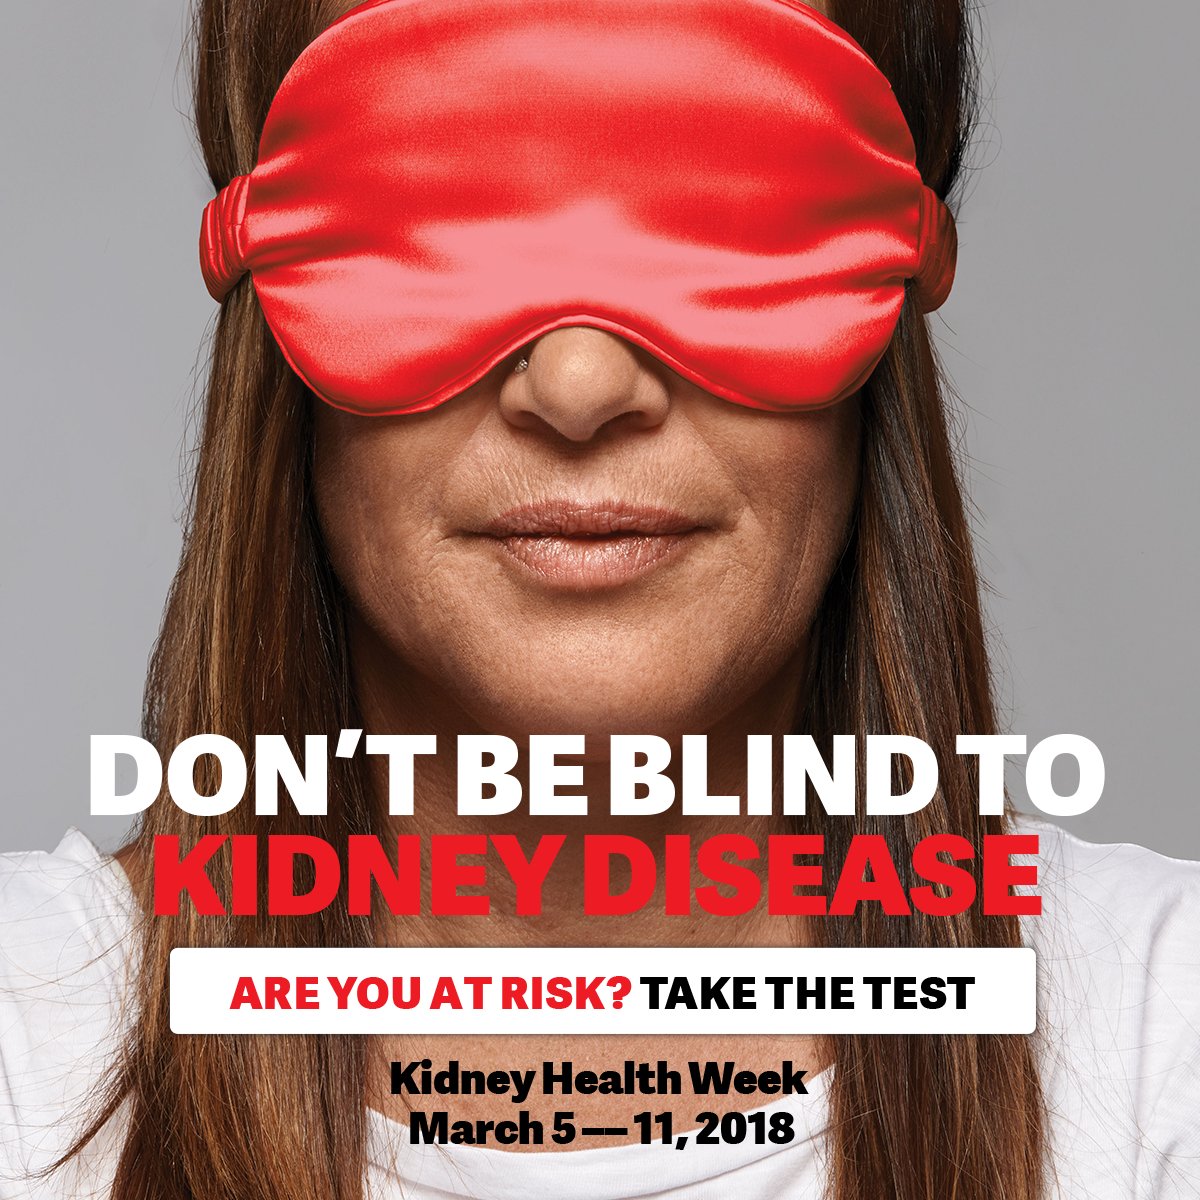 1 in 3 people in Australia is at increased risk of developing kidney disease and 90% of kidney function can be lost without any symptoms. Don’t be blind by waiting until you feel sick; find out if you’re at risk by taking the test: goo.gl/NiVrzp #KHW18 #KidneyRiskTest